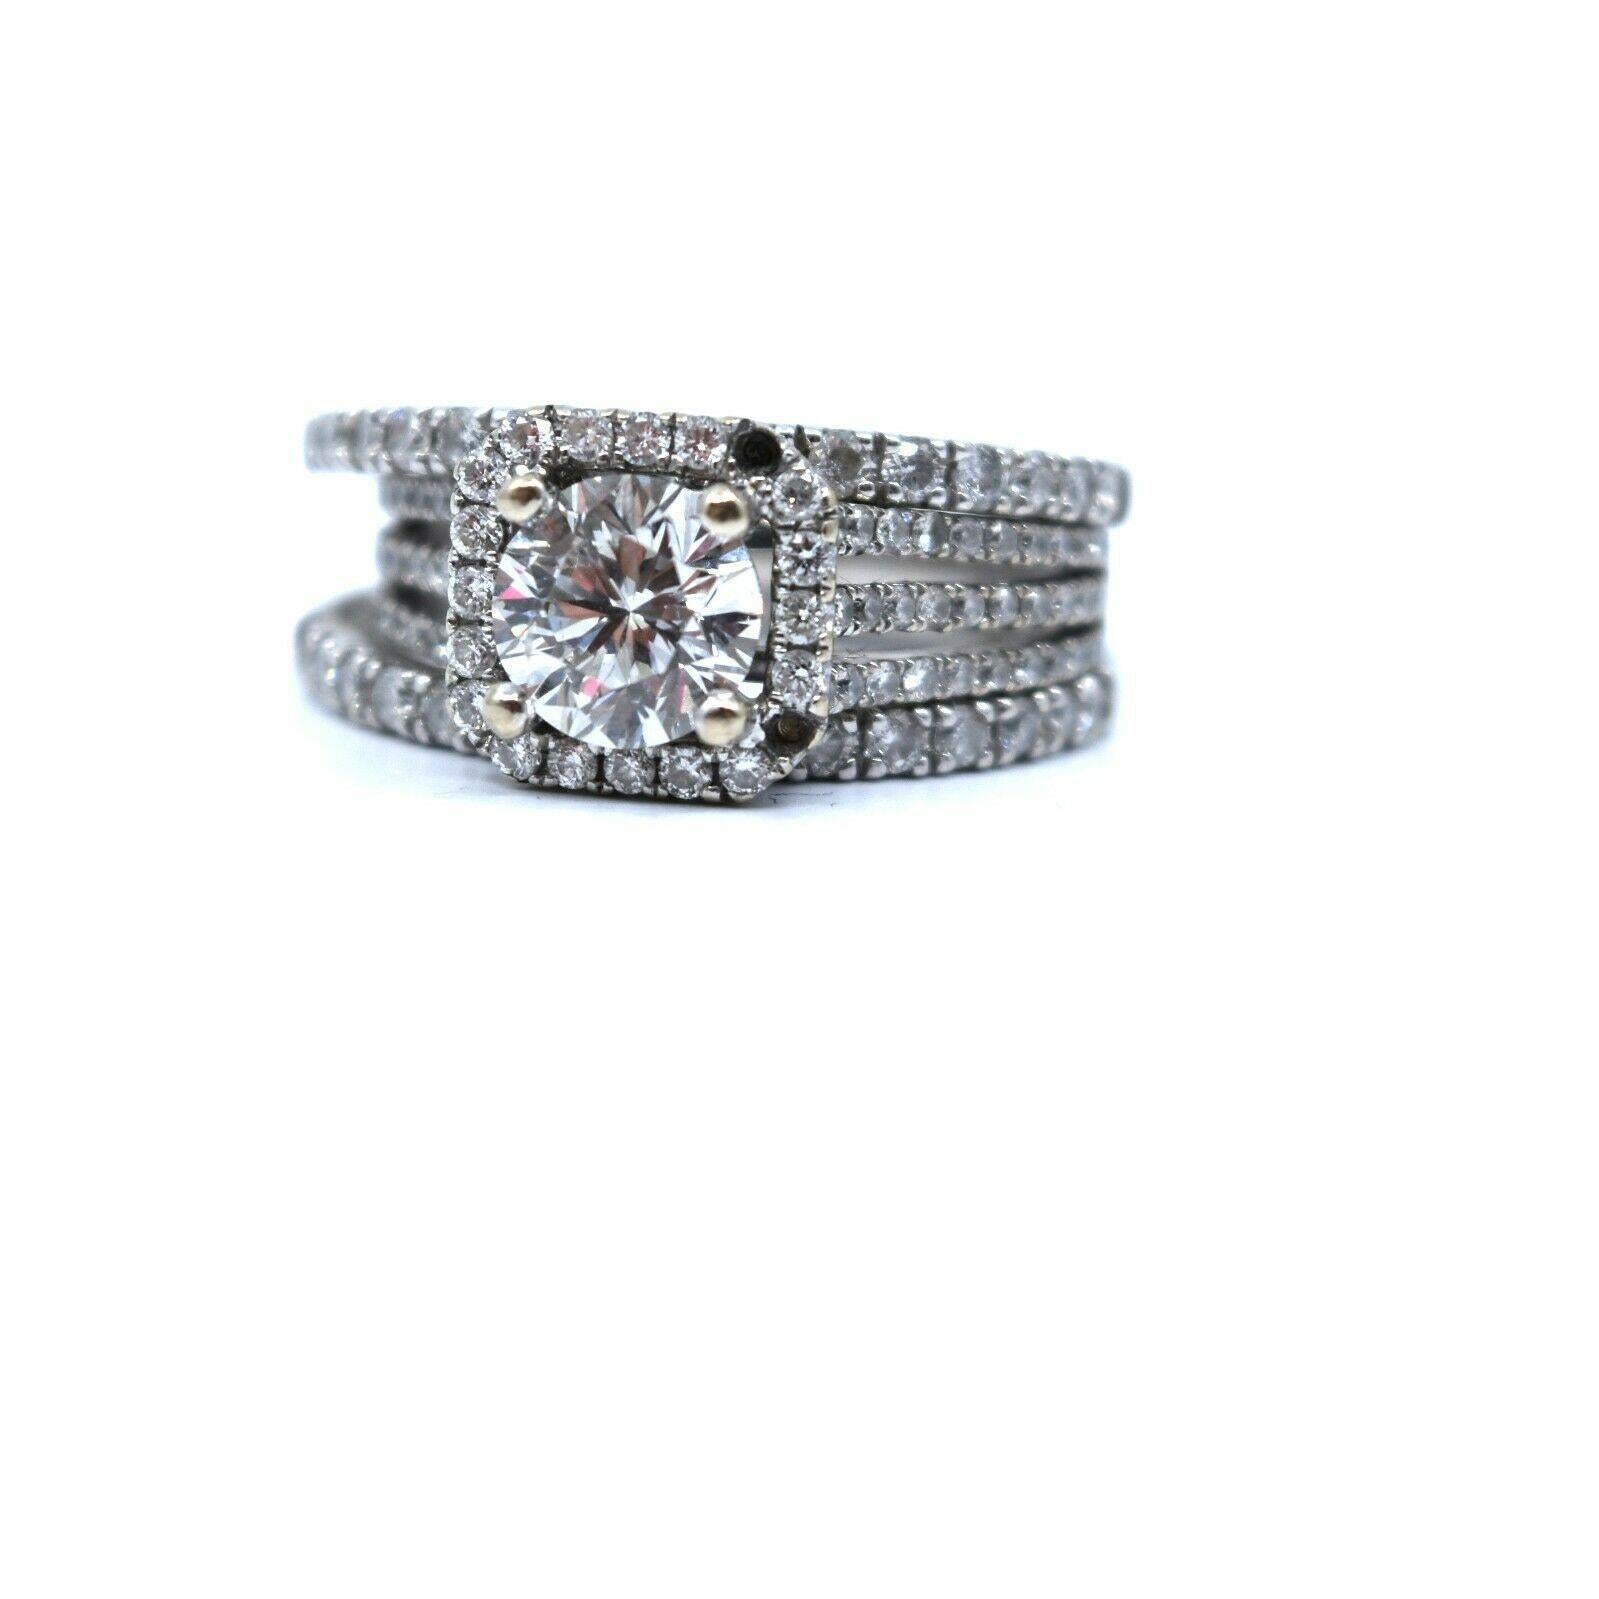 Brilliance Jewels, Miami
Questions? Call Us Anytime!
786,482,8100

Style: Engagement Ring

Metal Type: White Gold

Metal Purity: 18k

Stones: 1 Round Diamond Centerstone = approx. 0.99 ct

                  116 Round Diamond Accent stones = approx.